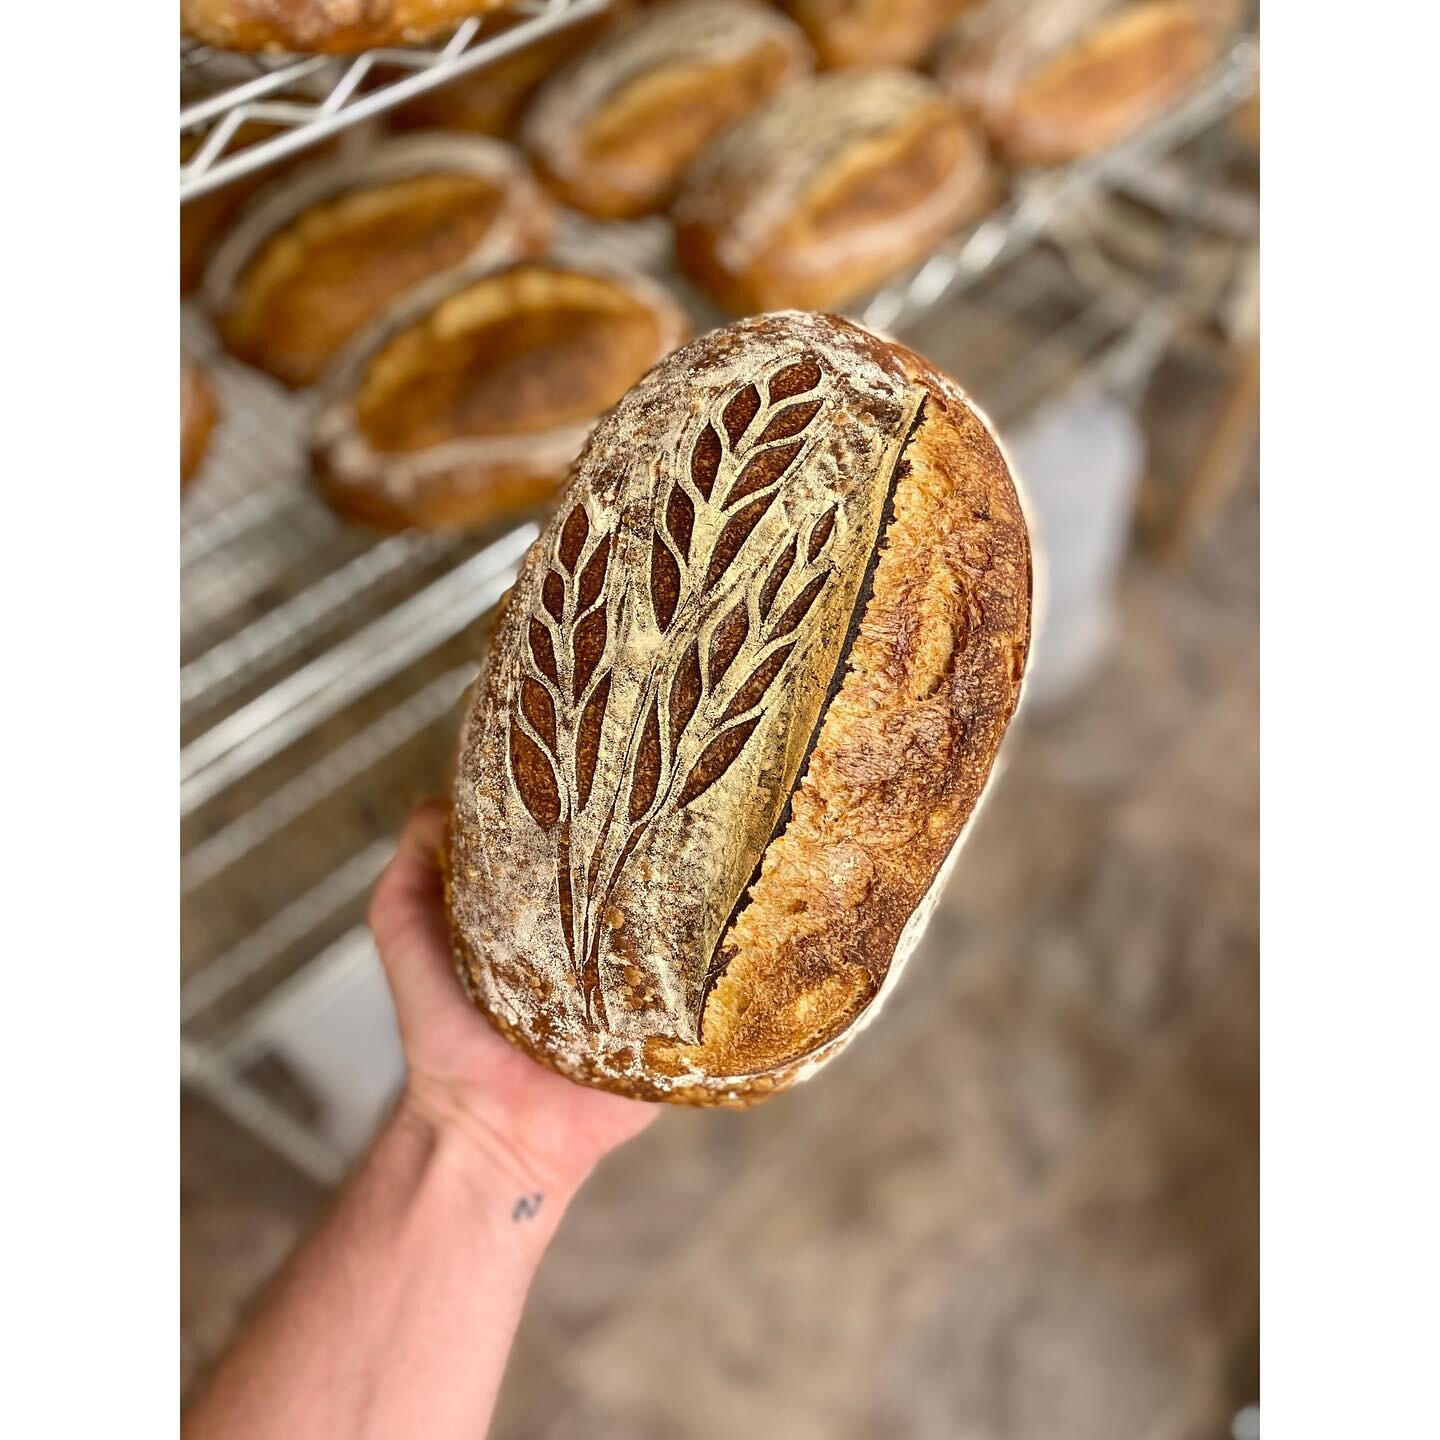 Get prepped for Labor Day this week with Country Loaves with a mix of Winter Langin &amp; Yecora Rojo flours  from @dry_storage as well as Rouge de Bordeaux Baguettes and Roasted Garlic, Cheddar &amp; Herbs loaves. Link in bio